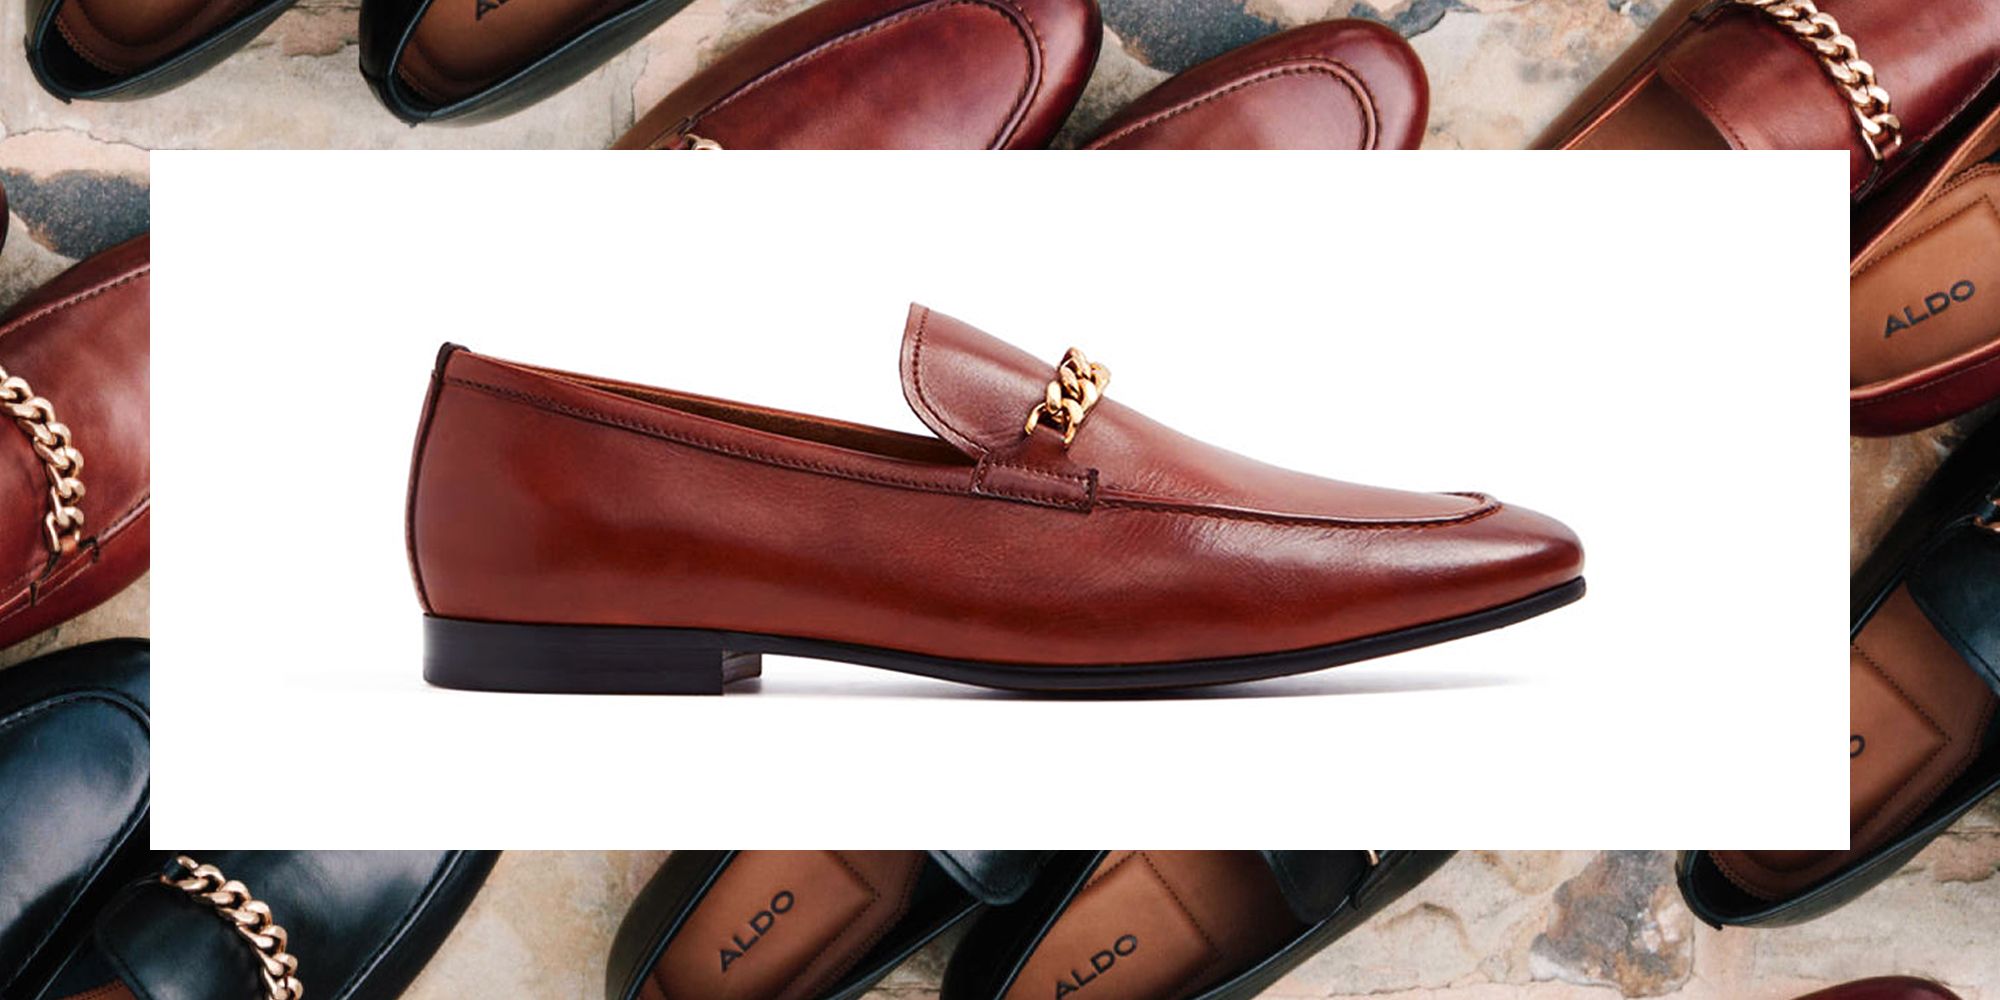 The 9 Best Men's Loafers for Fall - Stylish for Casual or Dress